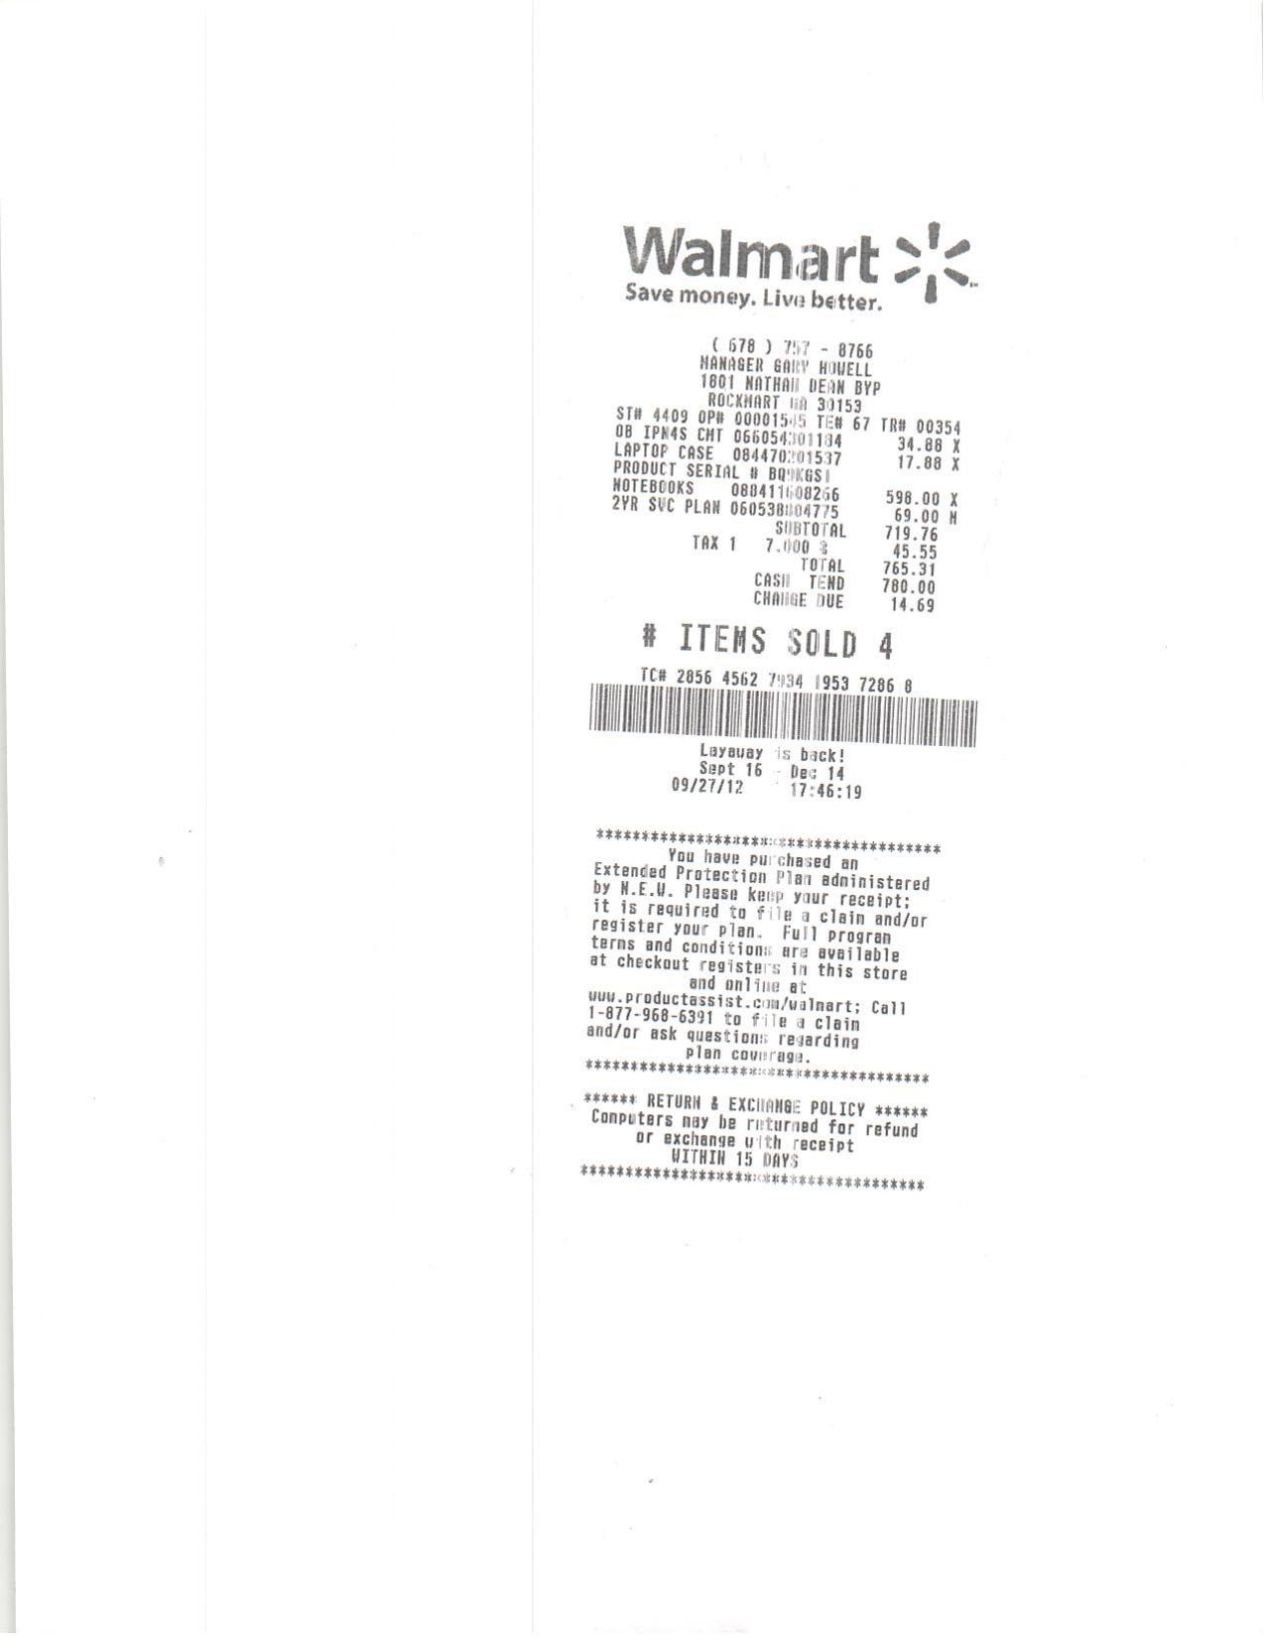 Walmart receipt and check from City of Aragon